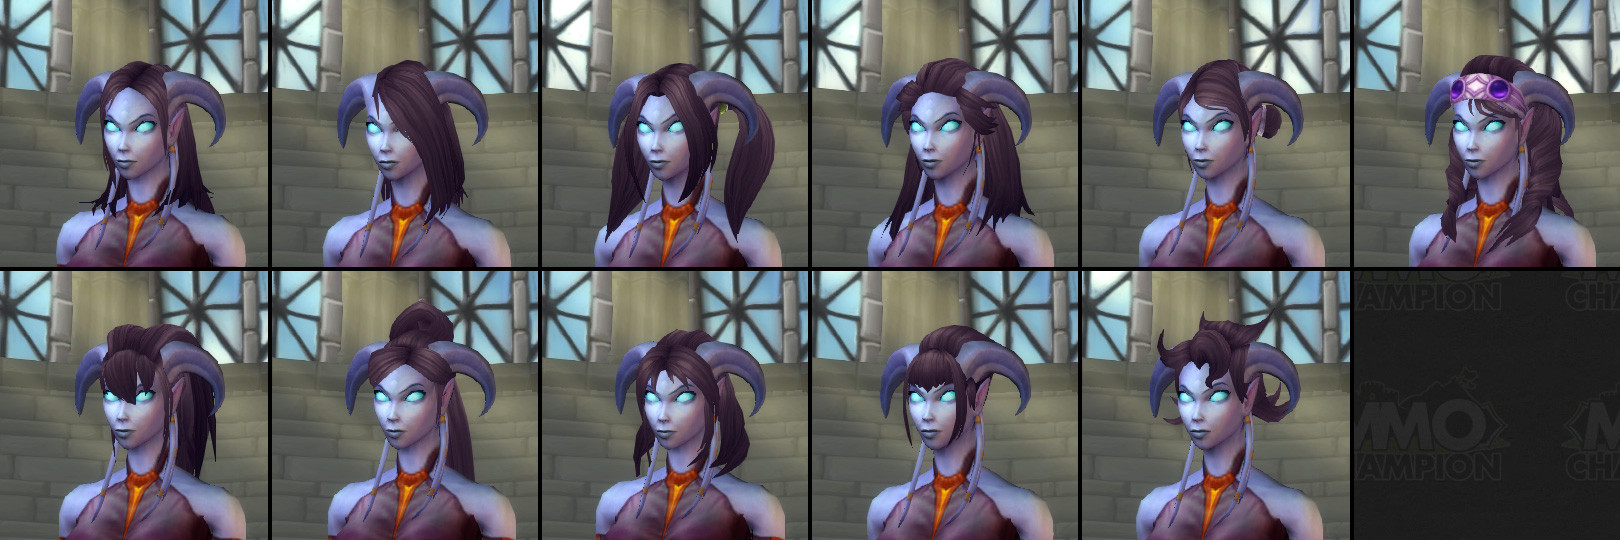 Draenei Female Hairstyles
 Warlords of Draenor Beta Build MMO Champion